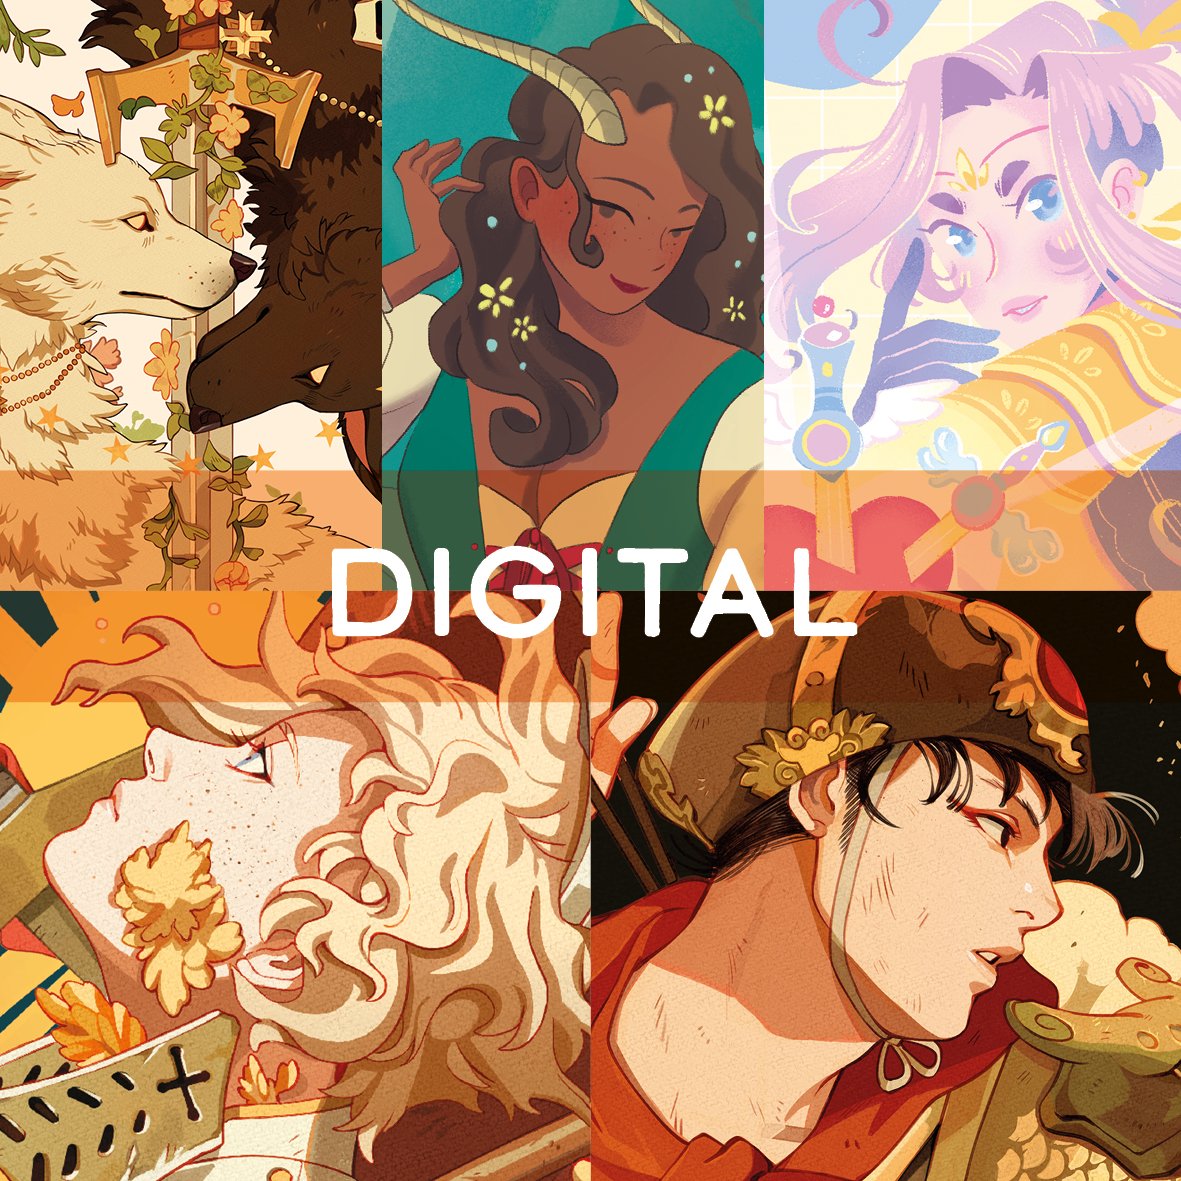 Our online shop closes tomorrow! Don't miss your chance to grab Magical Knights, Horns, and/or our Digital books 👀✨